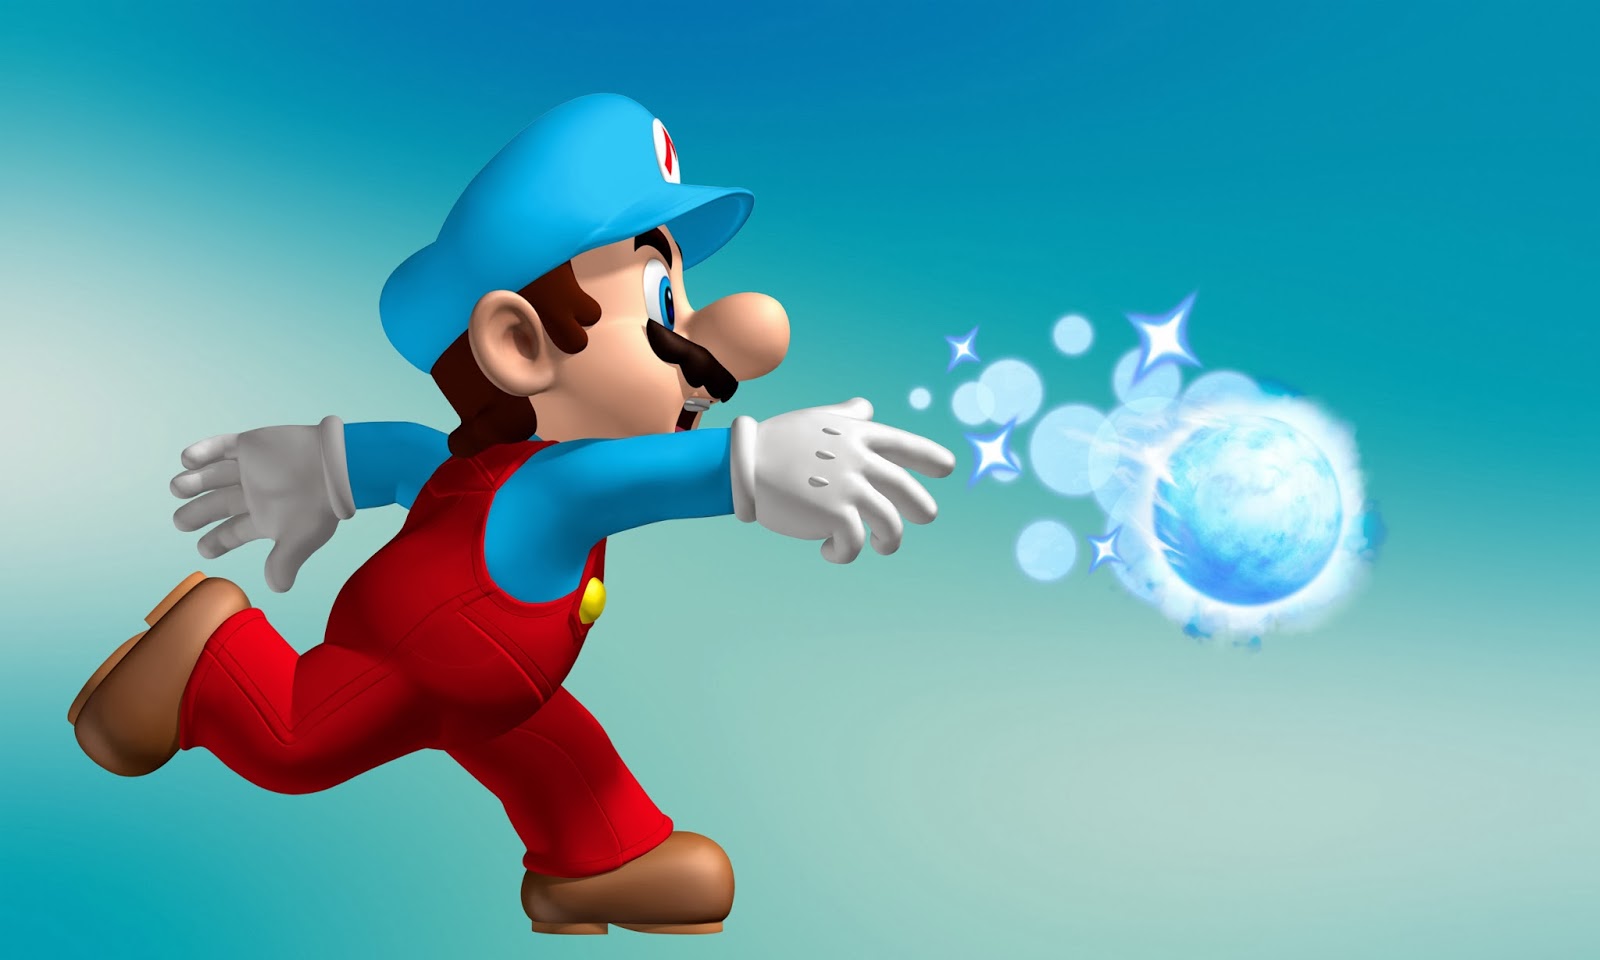 Mario Hd Wallpapers Hd Wallpapers High Definition HD Wallpapers Download Free Map Images Wallpaper [wallpaper684.blogspot.com]